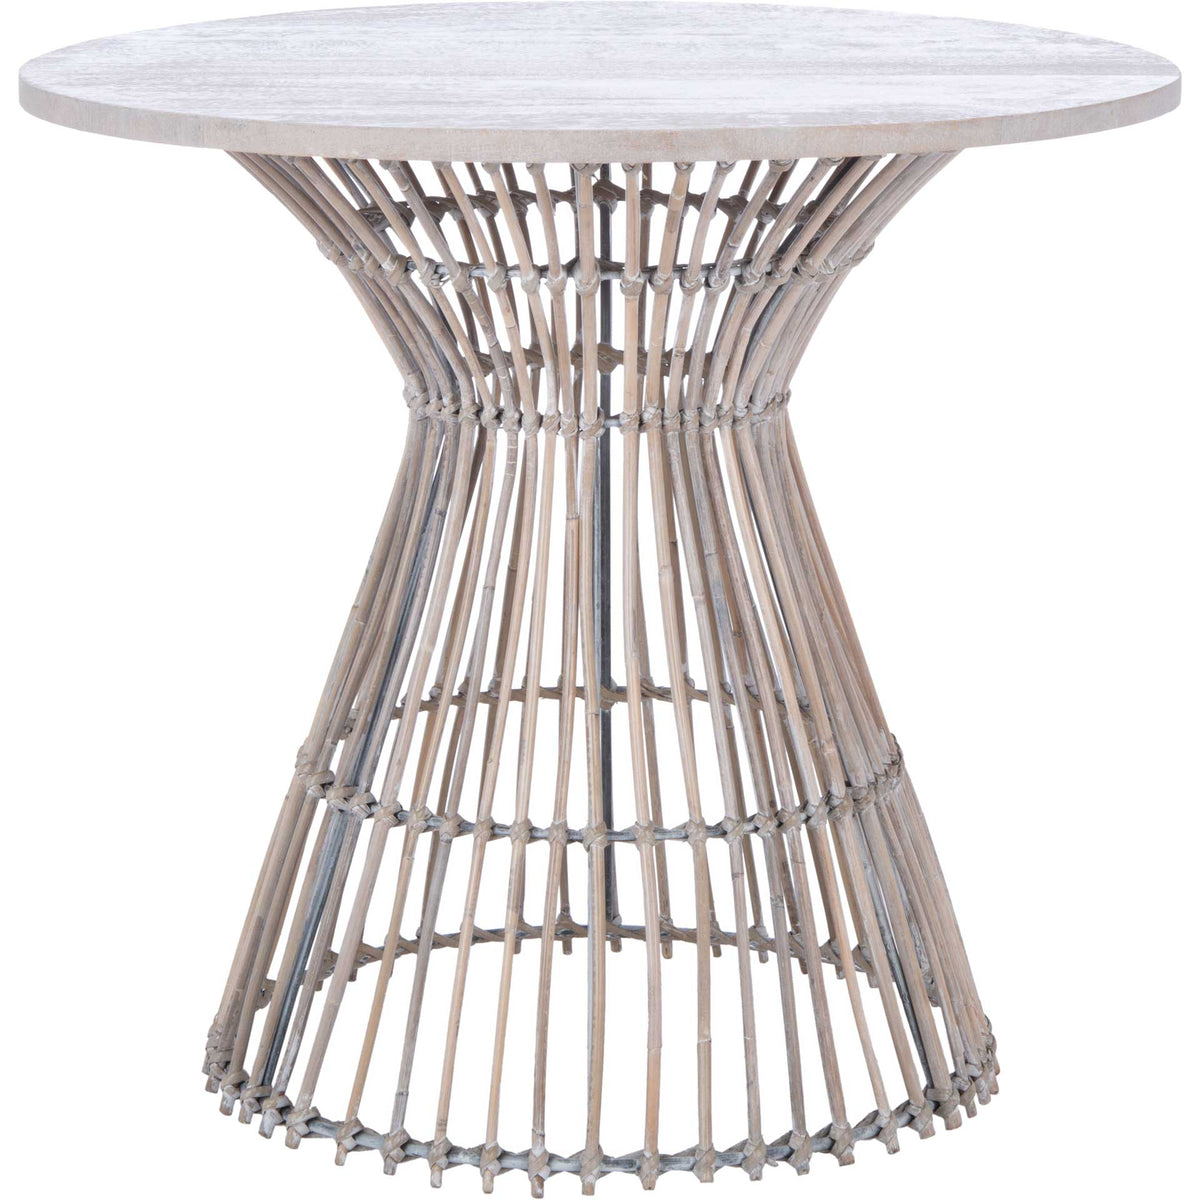 Whitley Round Accent Table Gray White Wash/Black